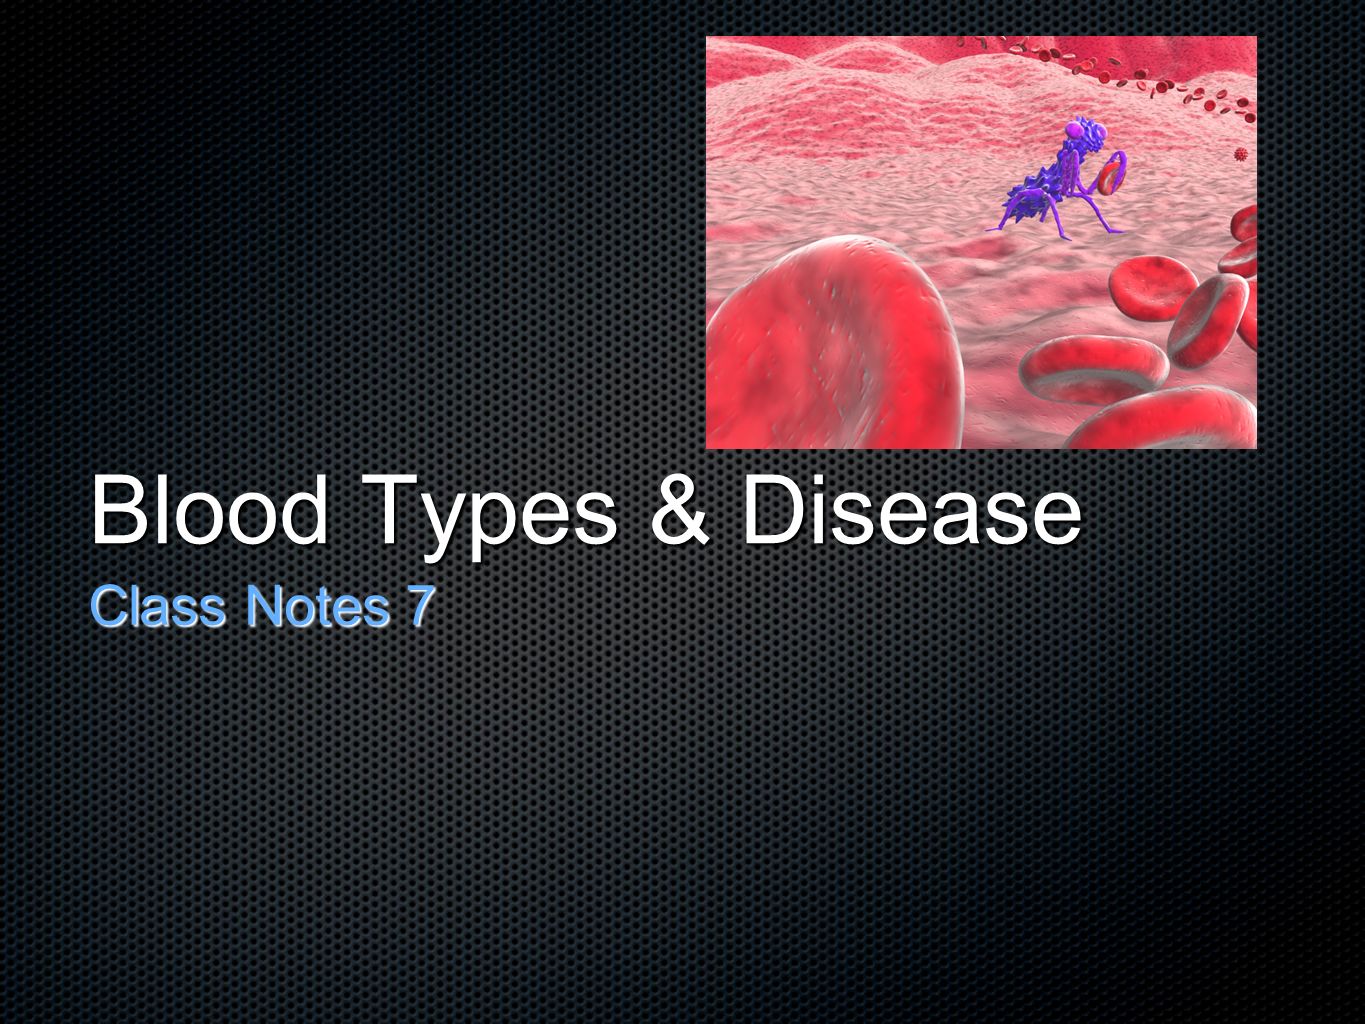 Blood Types & Disease Class Notes 7